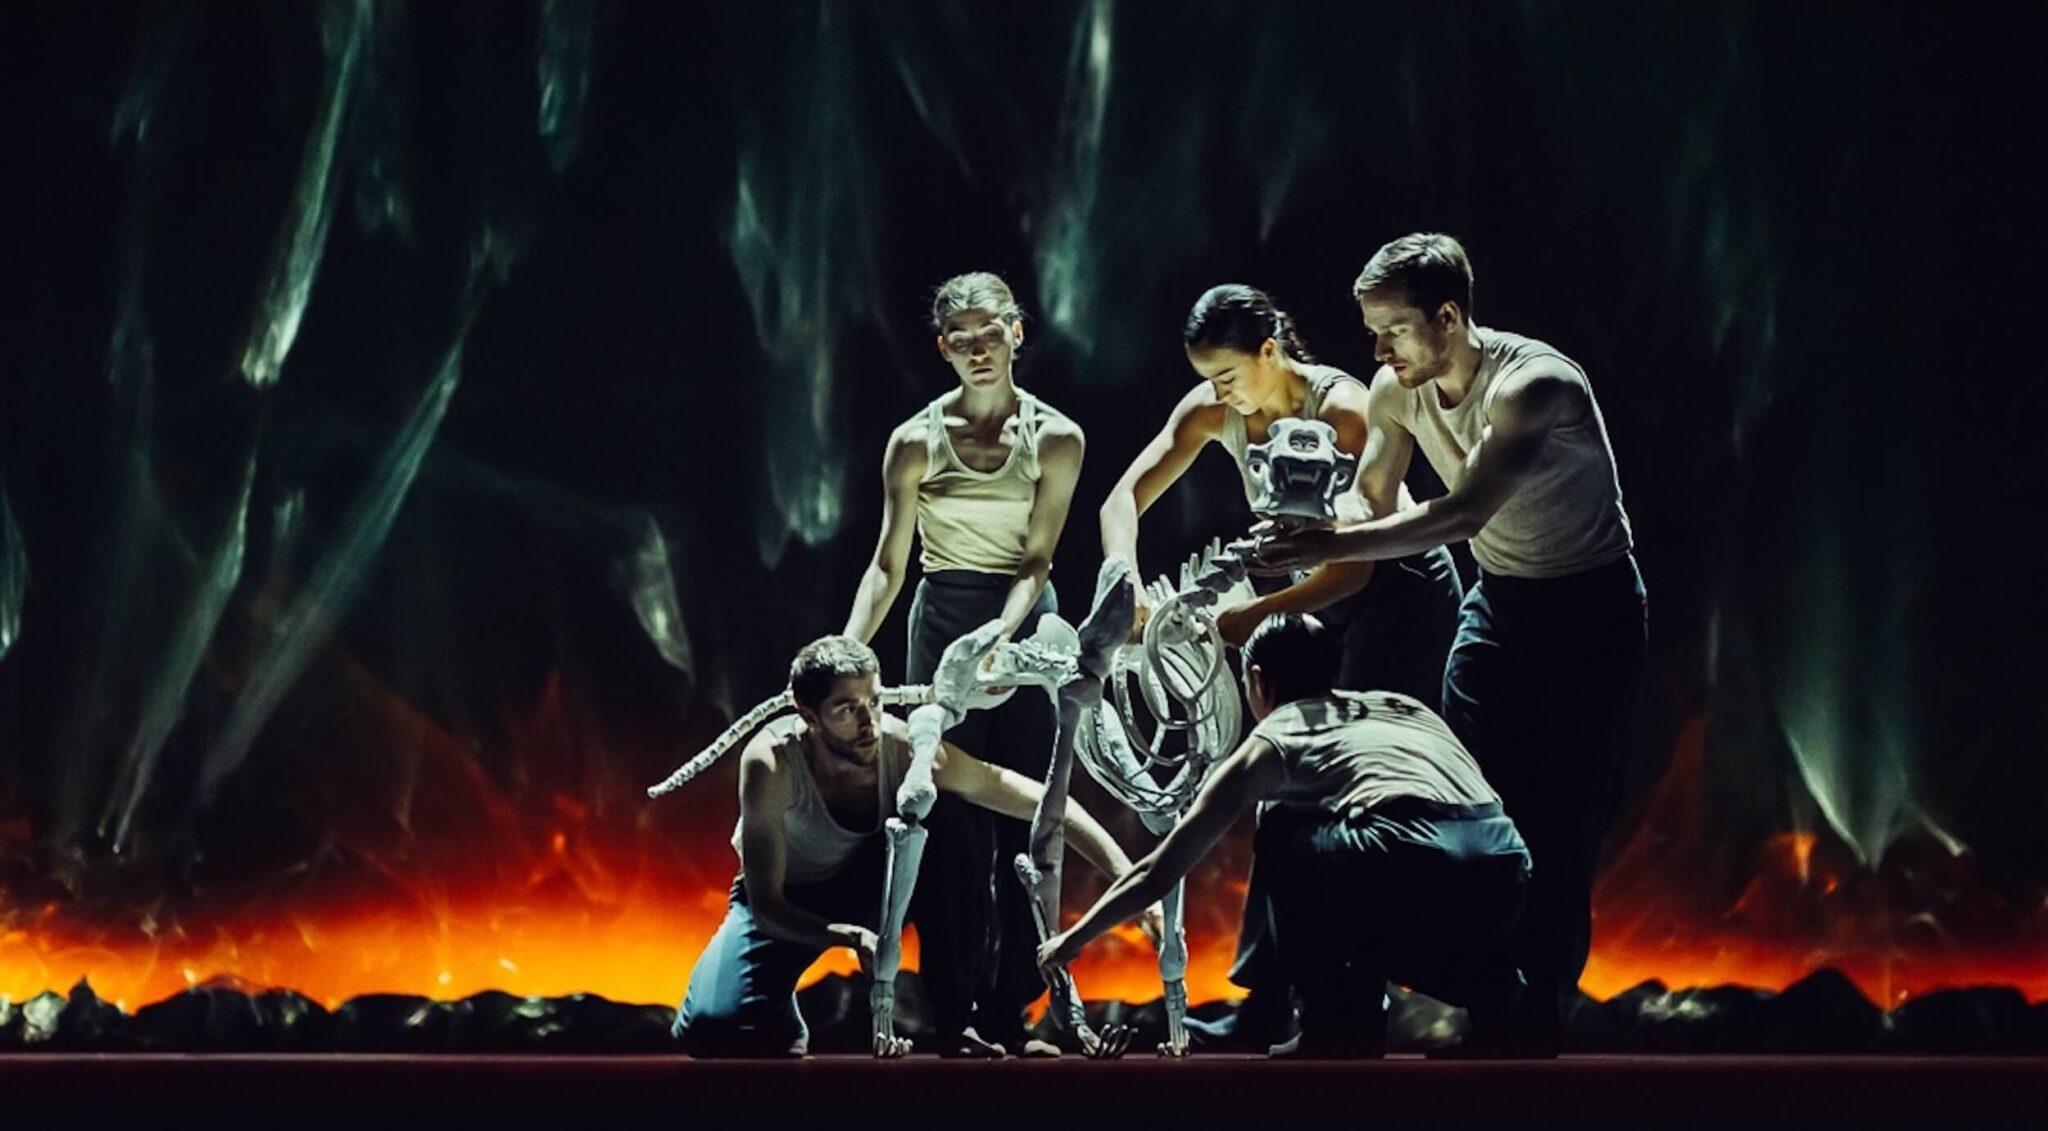 In Figures in Extinction, a group of serious looking dancers manipulate a skeleton with four legs and a long tail, with a backdrop of destruction and fire behind them.